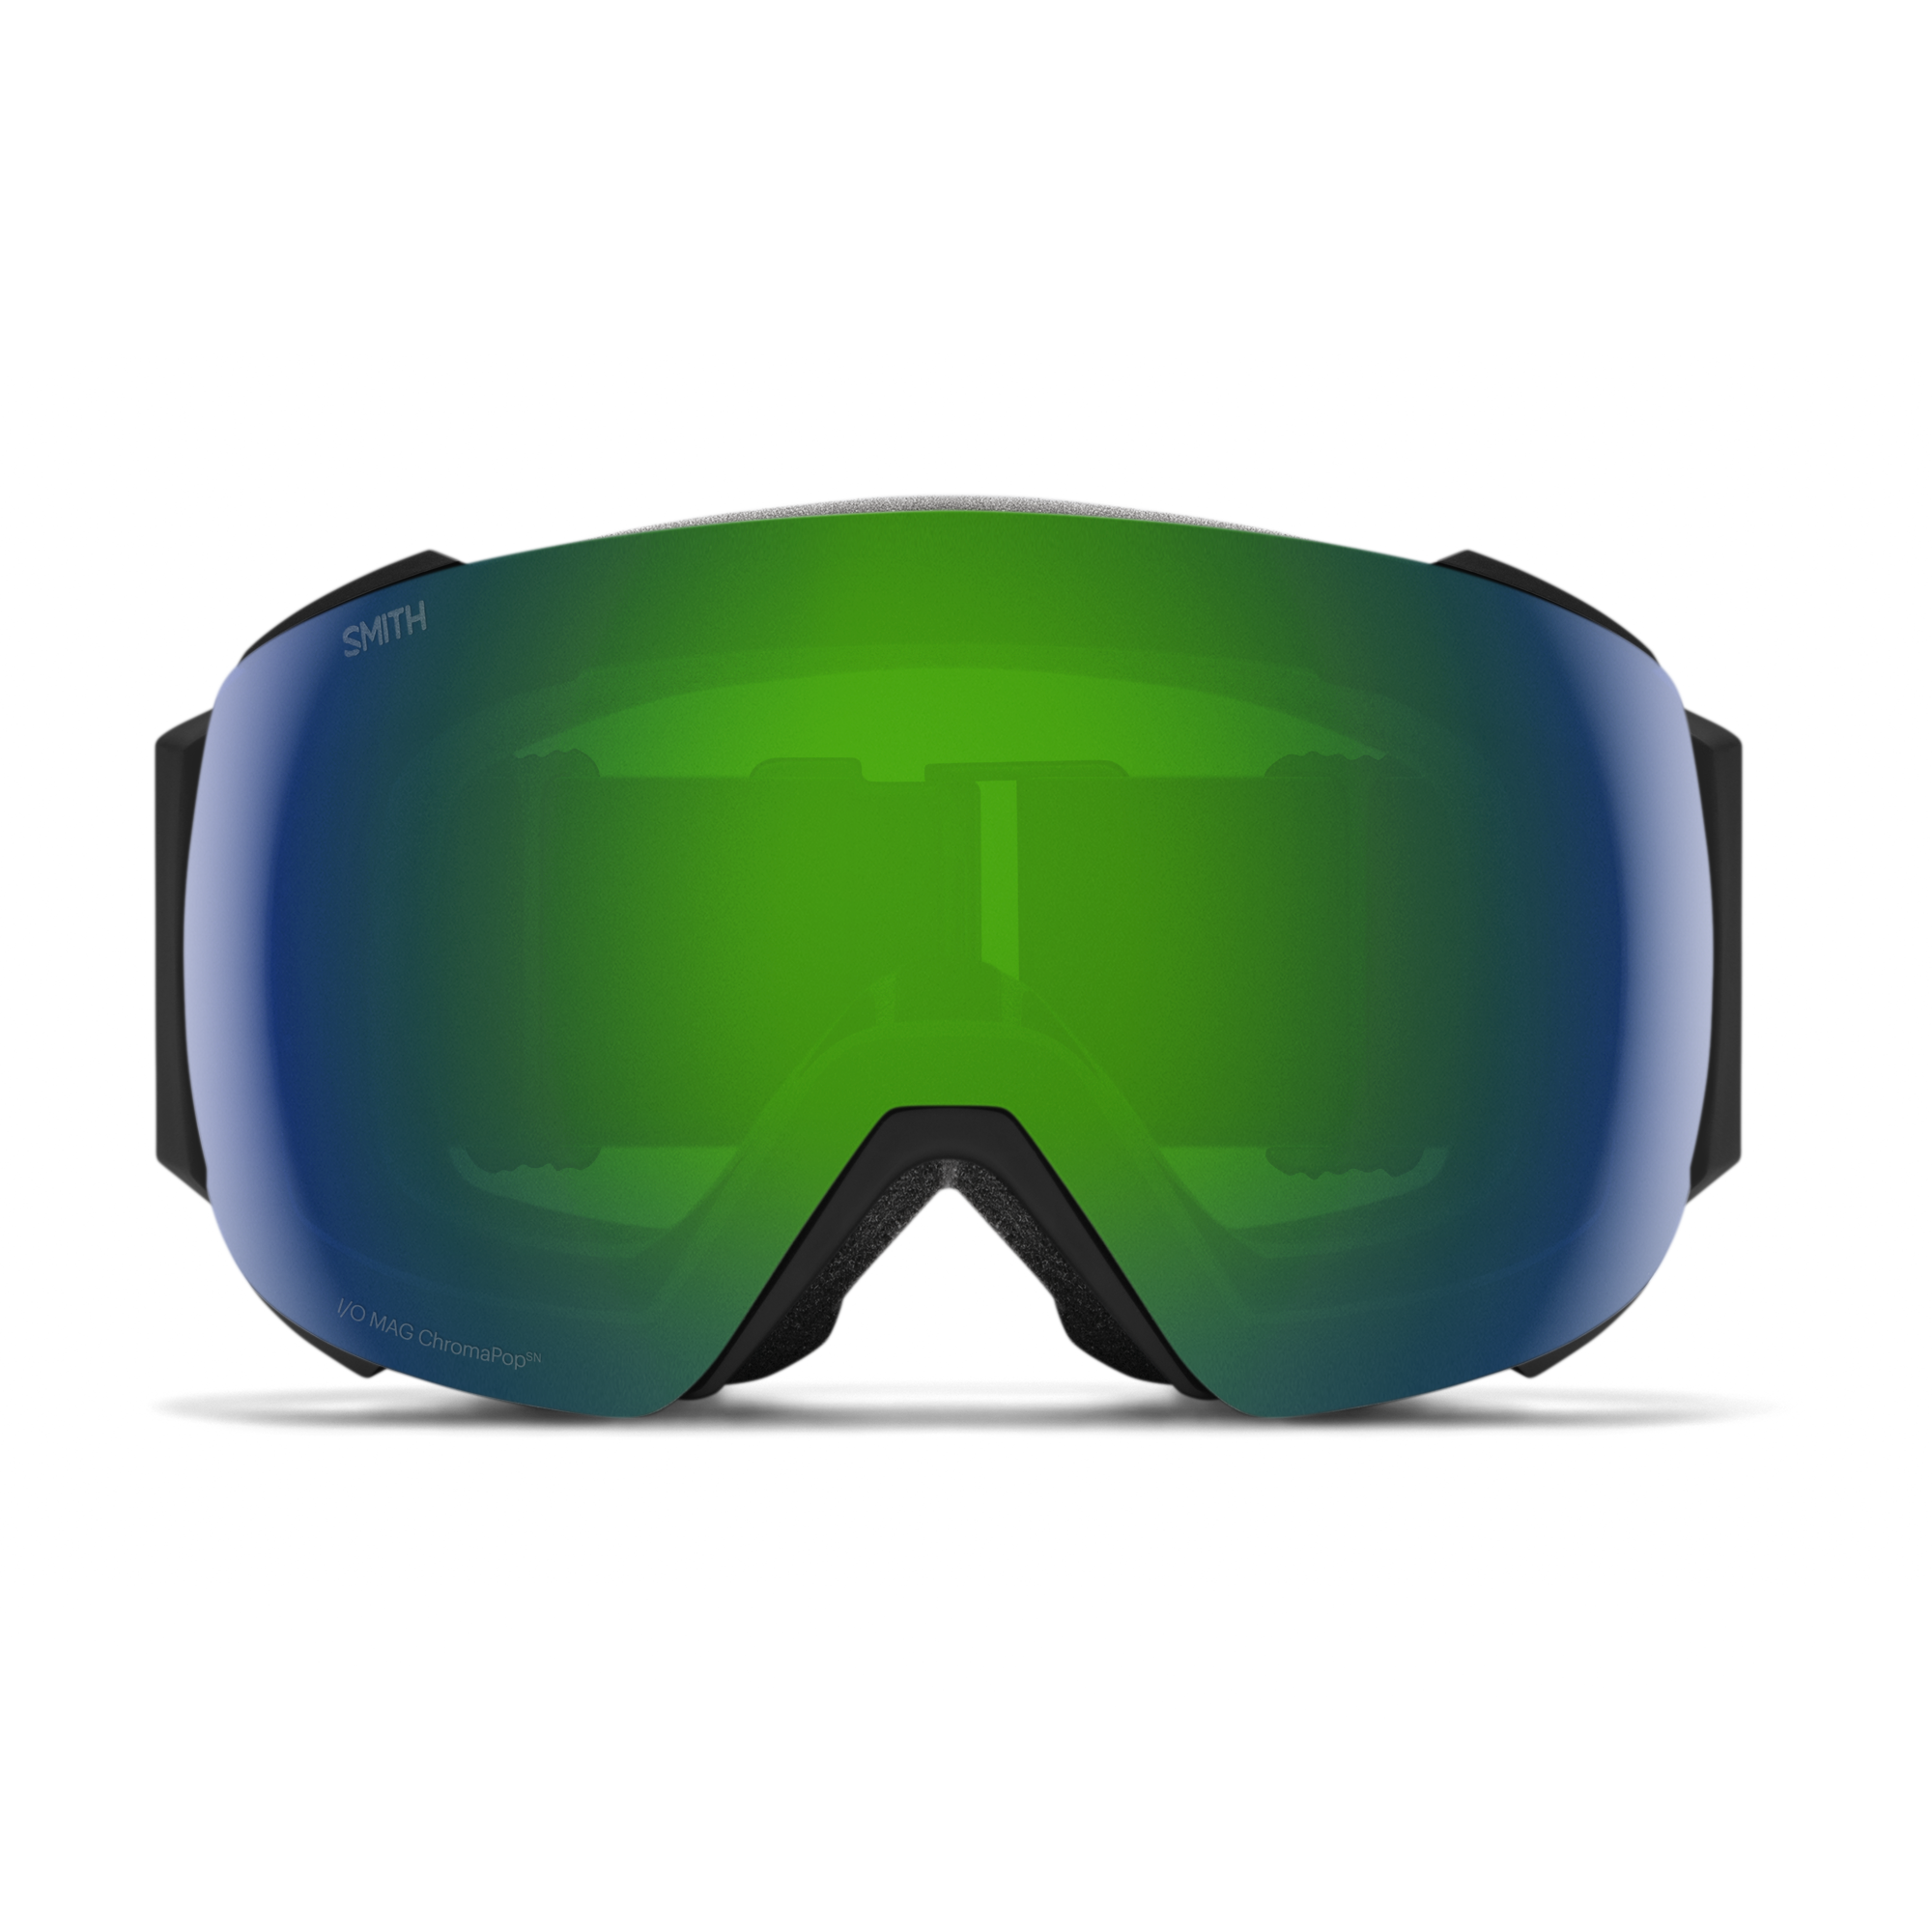 Smith IO MAG goggles in Black/Sun Green. Blue and green lenses, swap out to orange lenses. Black adjustable strap.